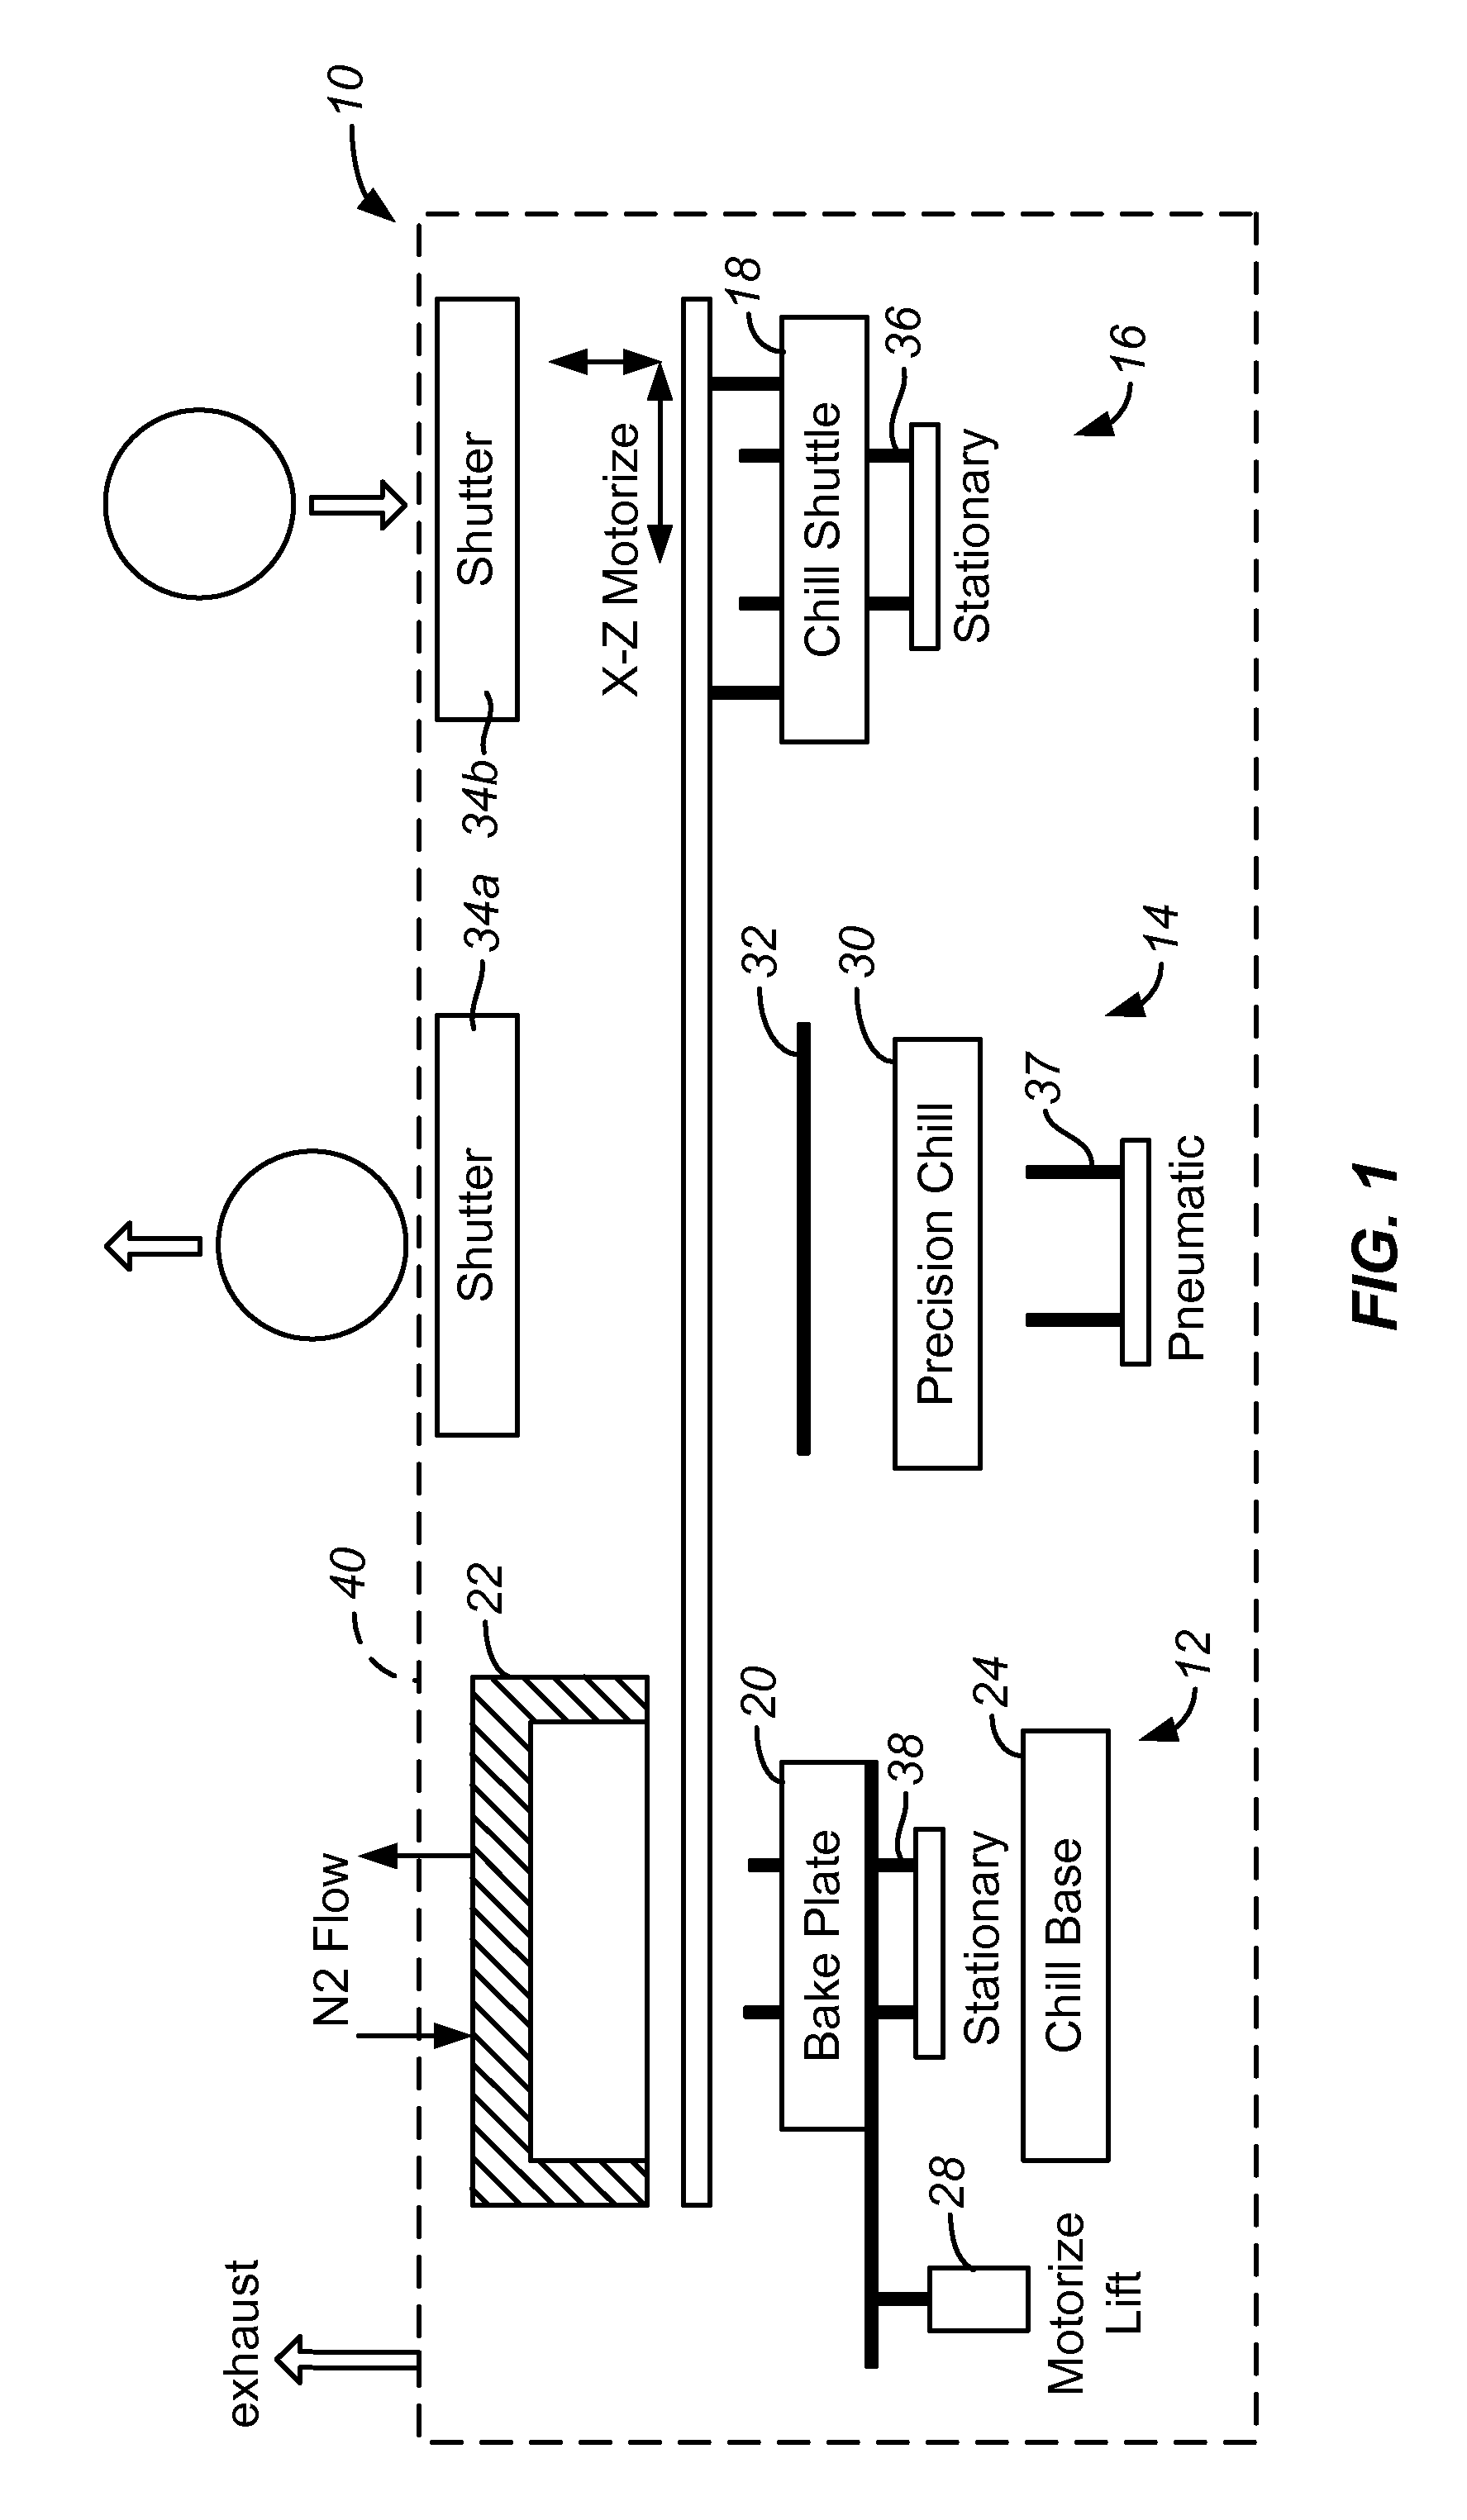 Integrated thermal unit having a shuttle with two-axis movement